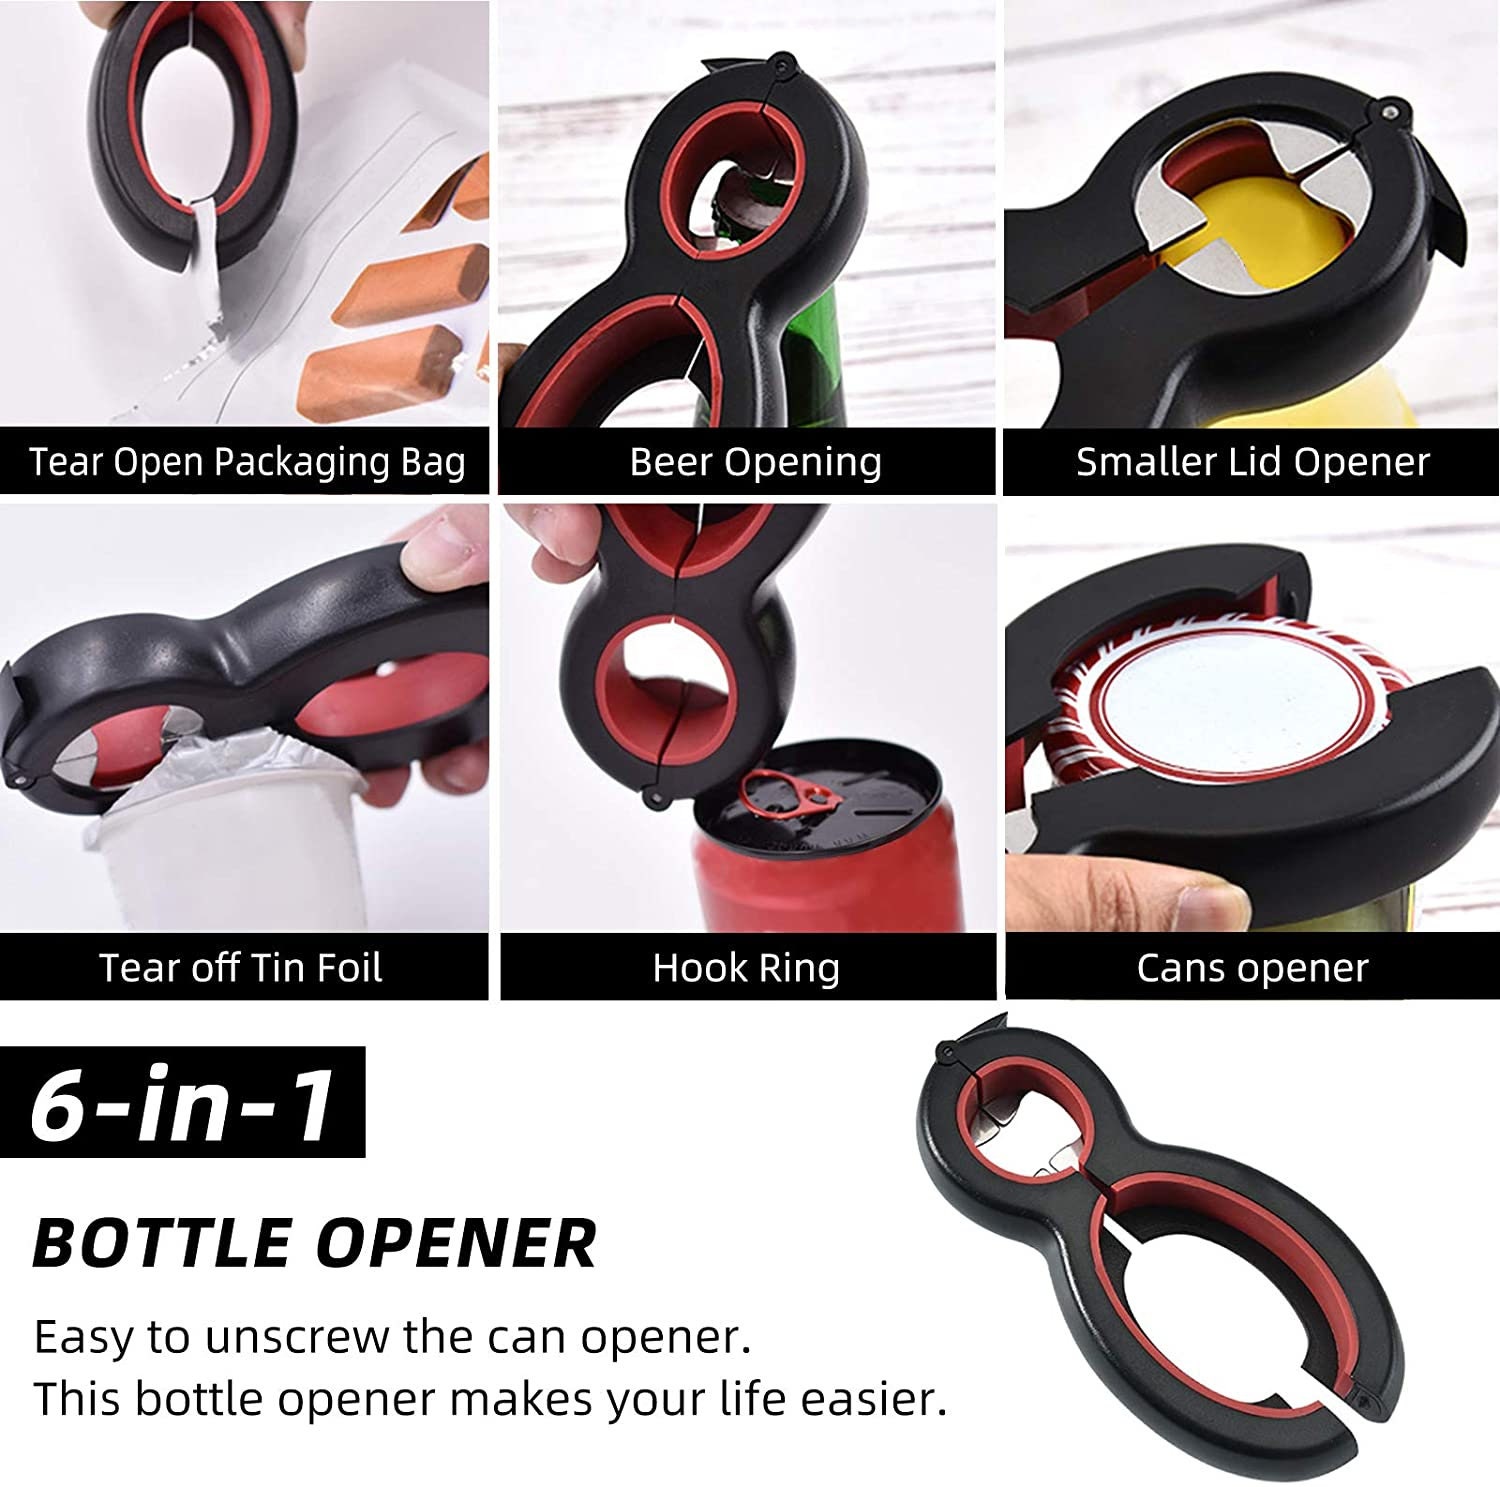 How to Use Meyuewal Silicone Multi Function Jar Opener? 